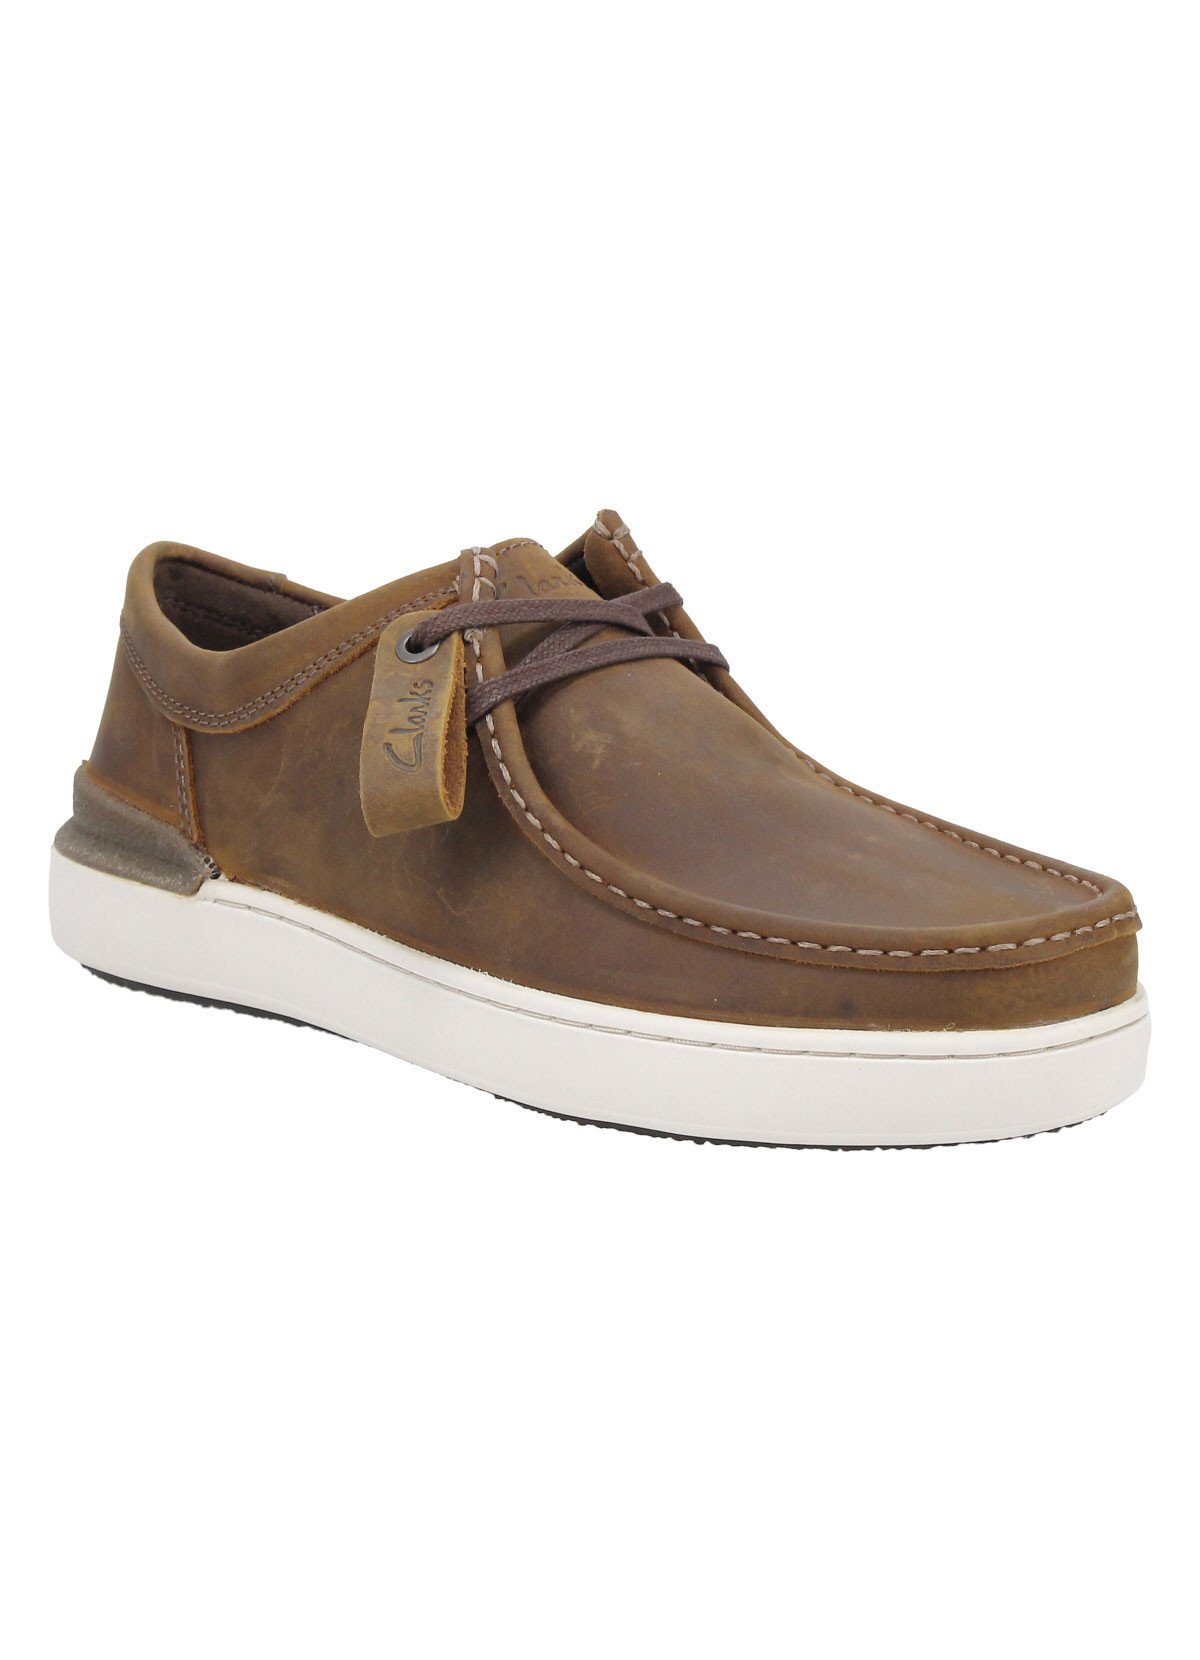 Clarks COURTLITEWALLY BEESWAX